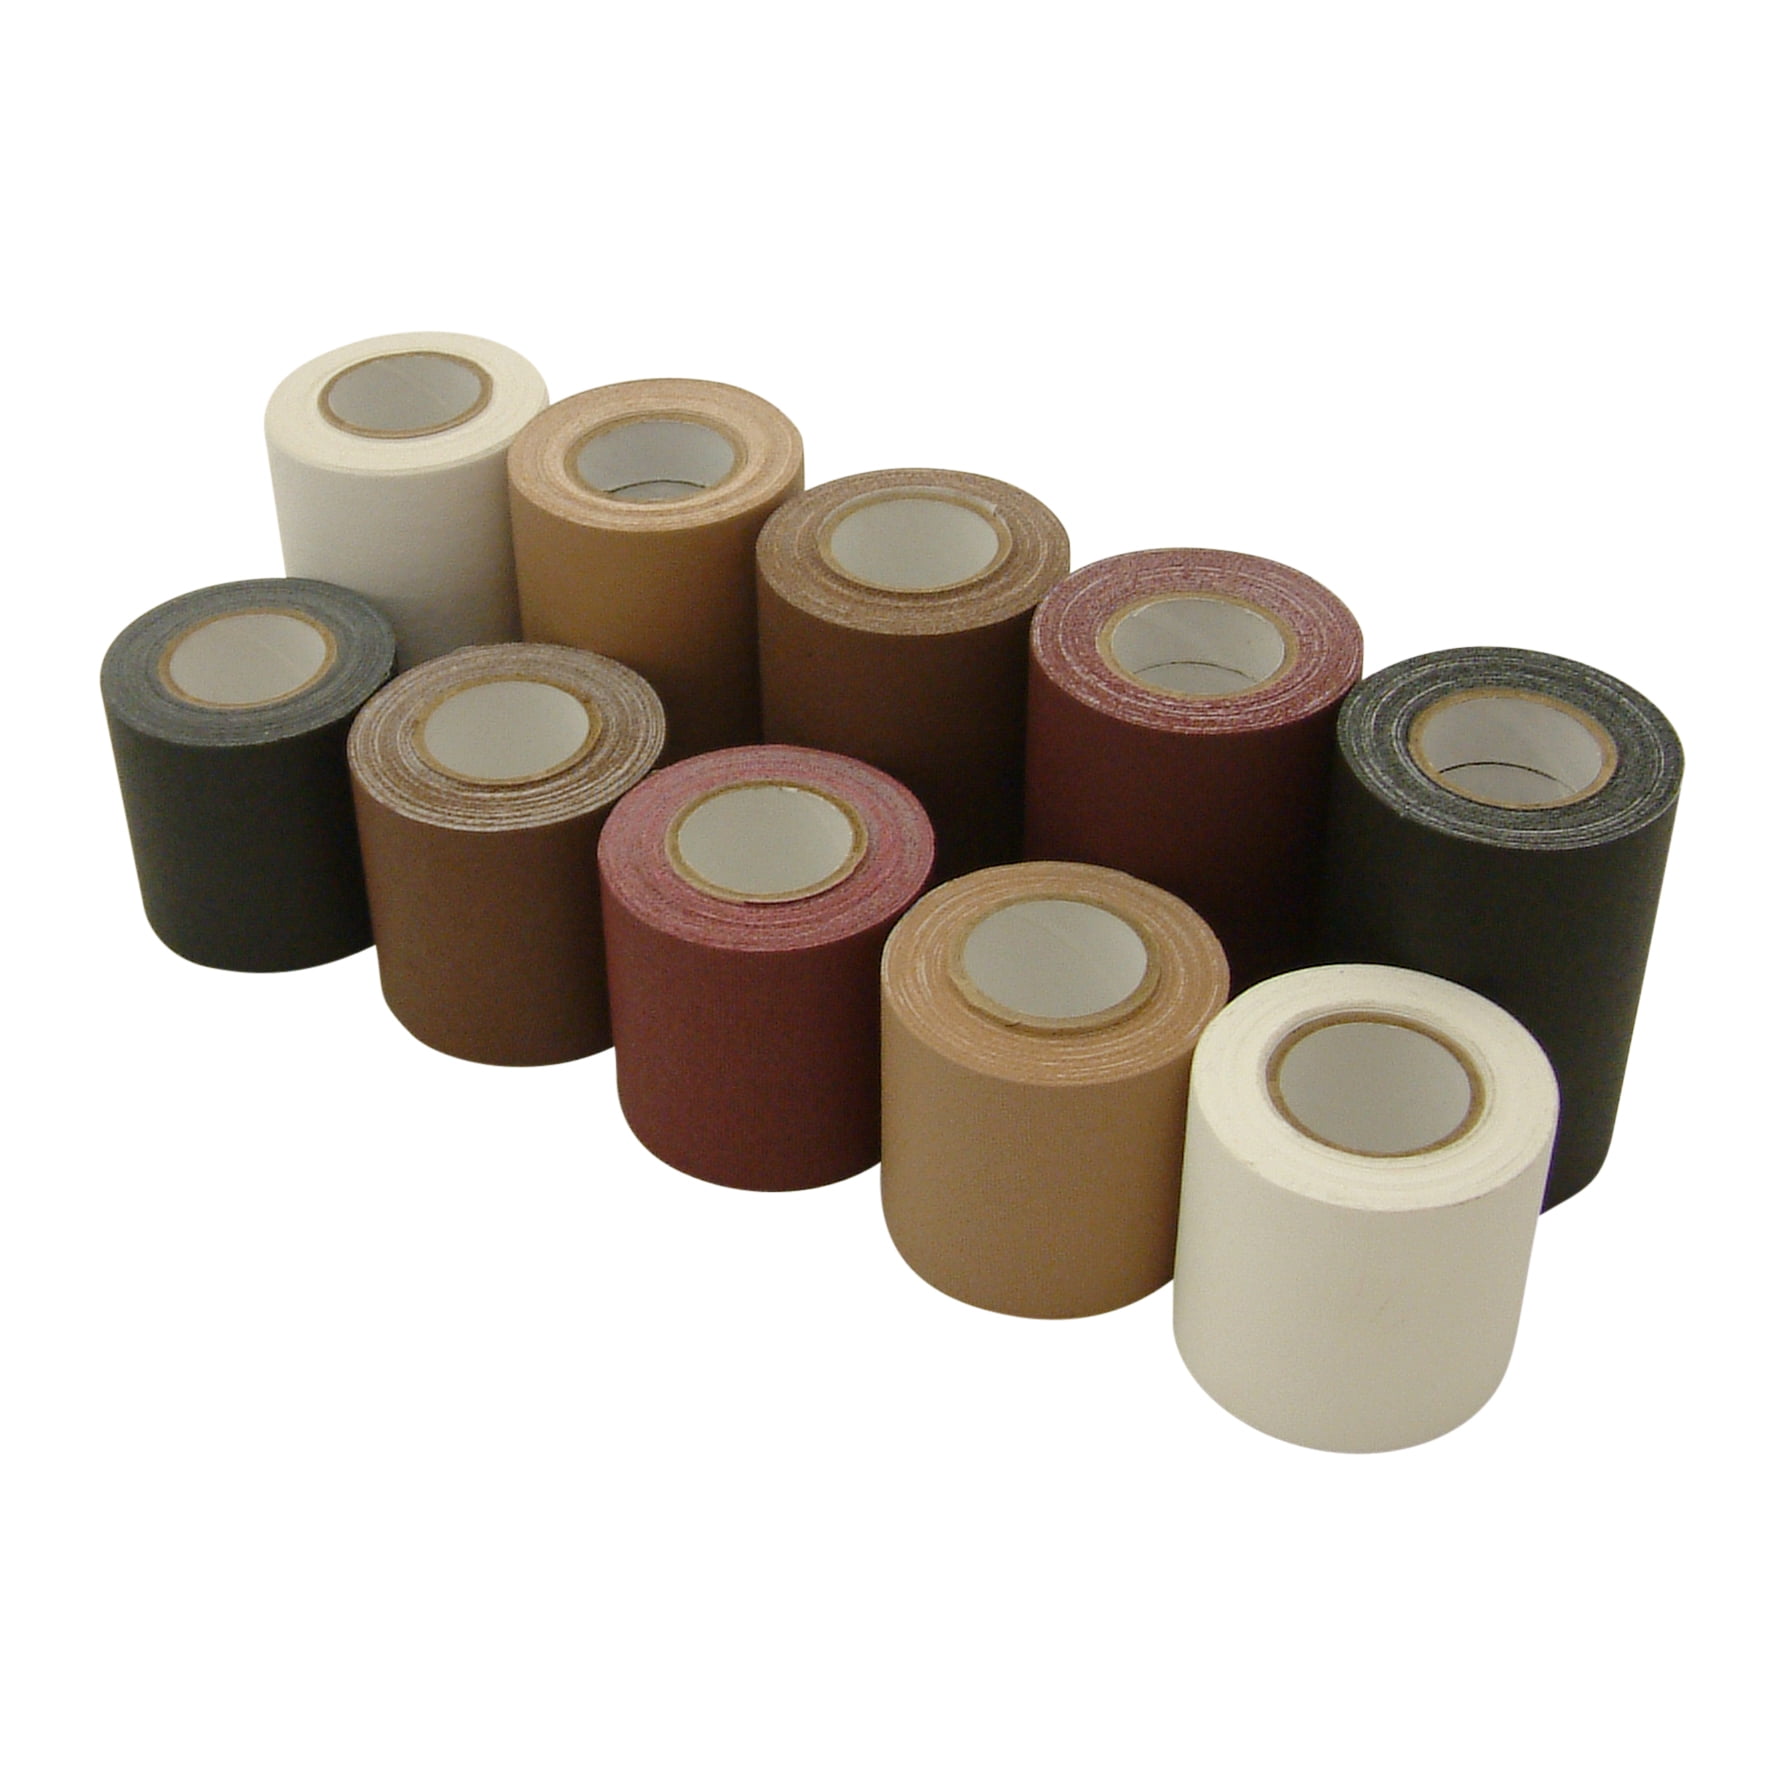 Generic Faux Leather and Vinyl Repair Tape 3x60 inch, Durable